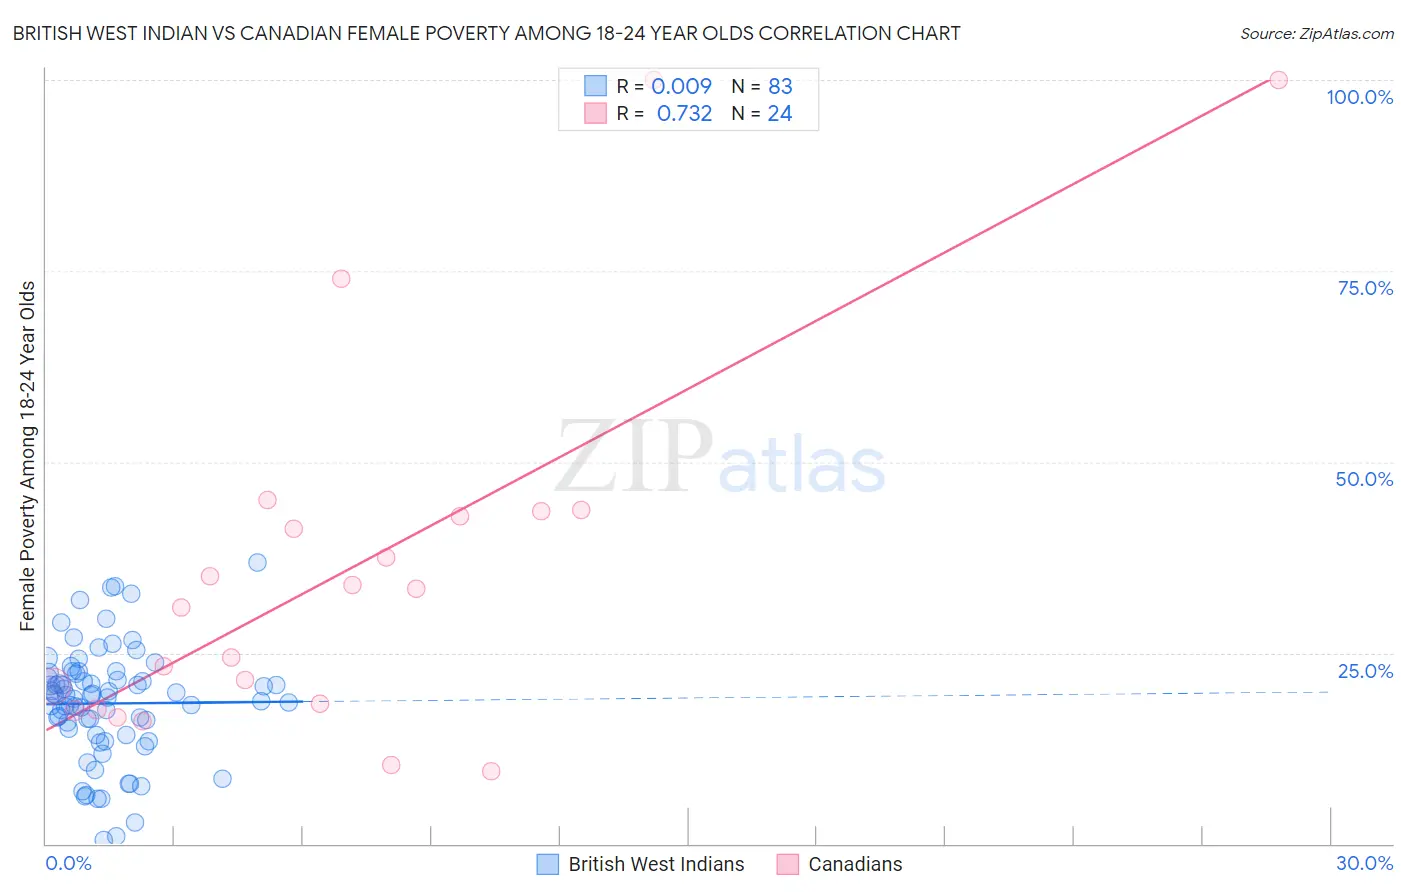 British West Indian vs Canadian Female Poverty Among 18-24 Year Olds